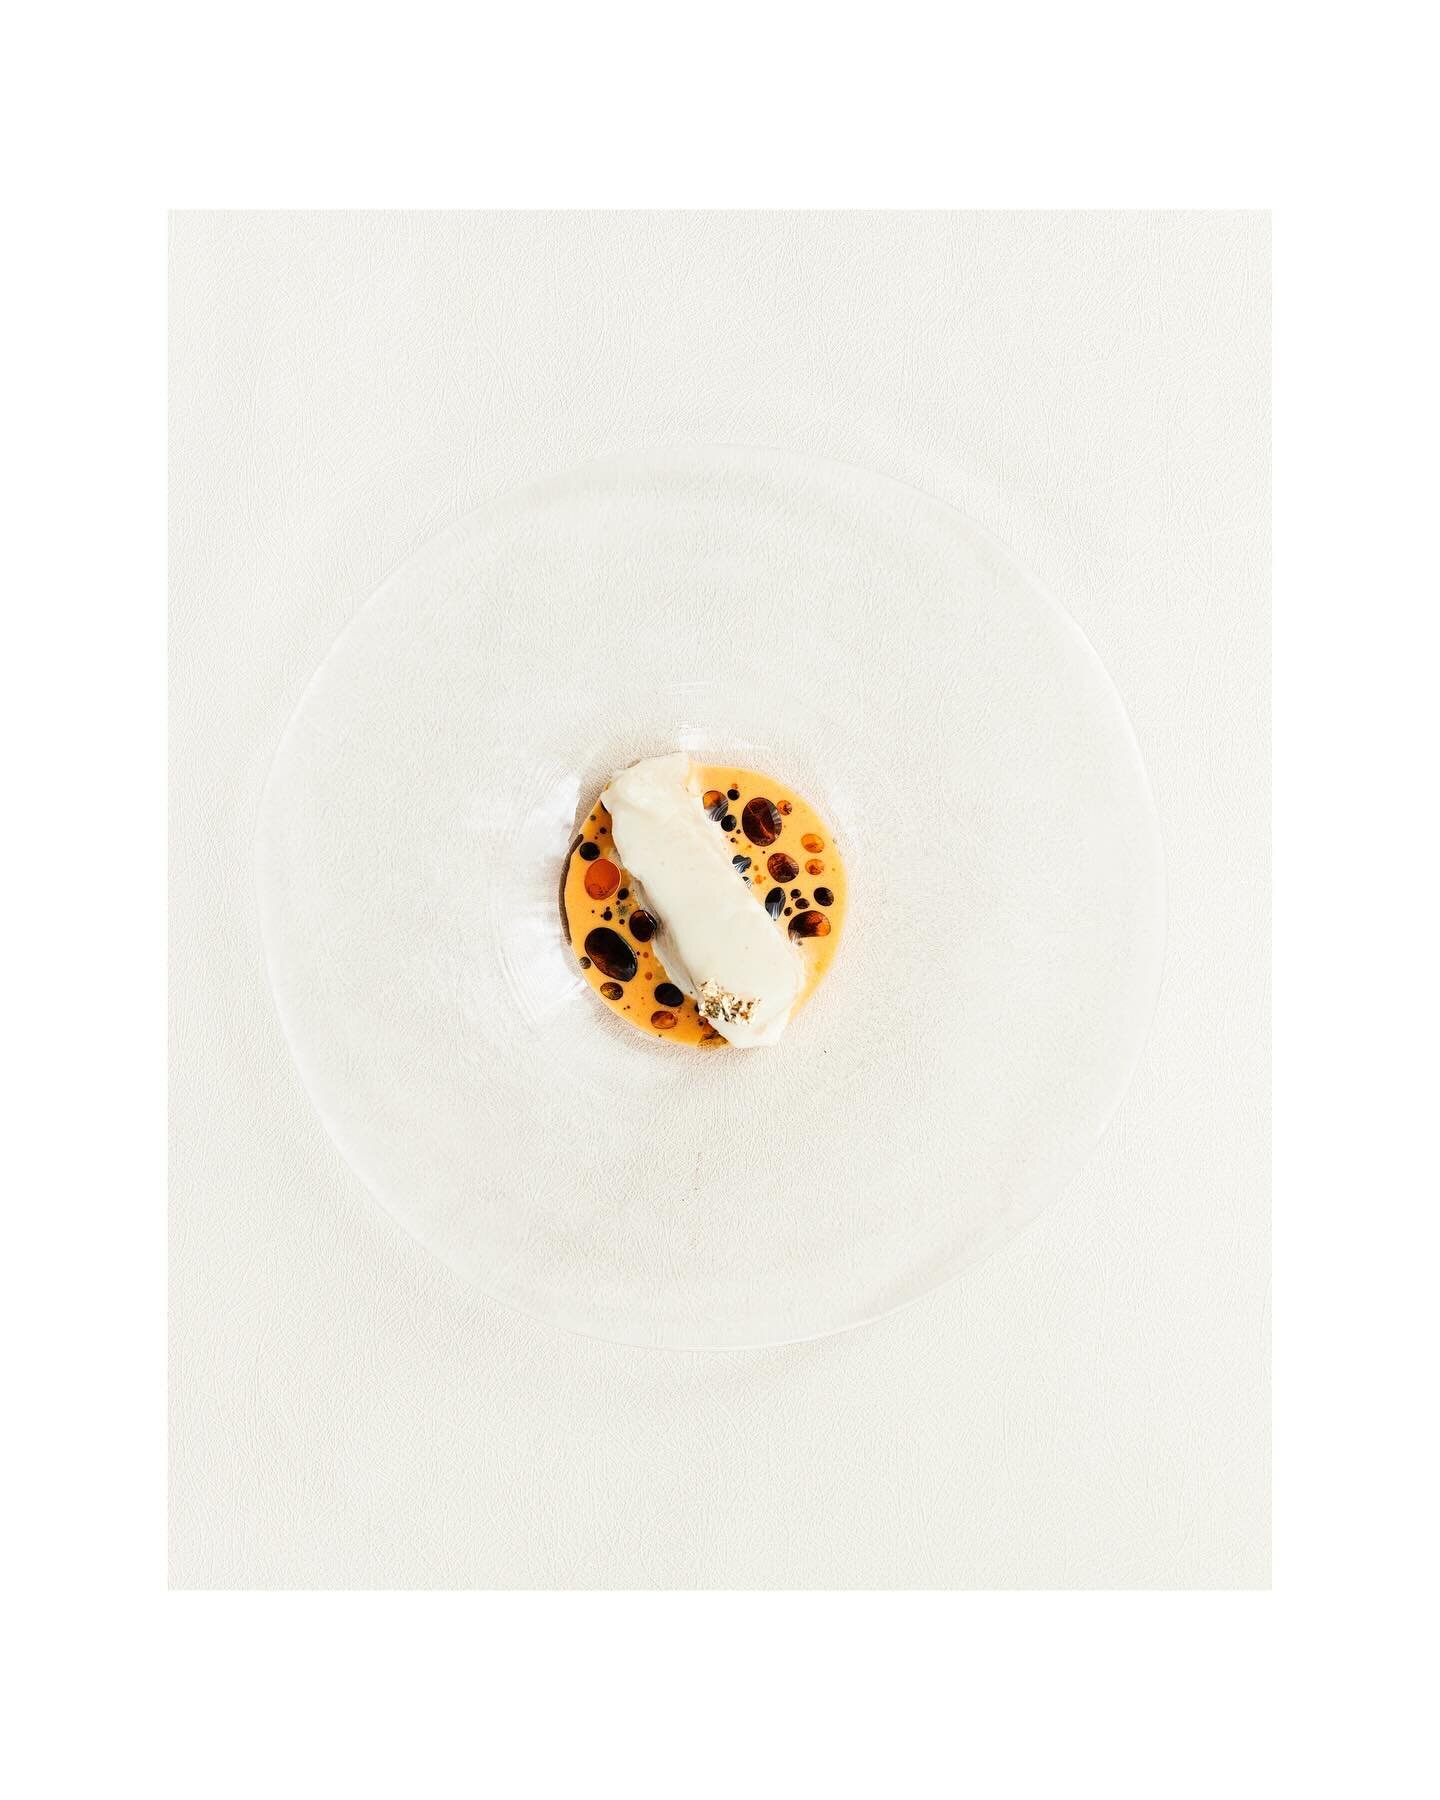 Halibut. Bone broth. Crab fat 

- burnt hay oil. tomato oil. XO made from local dried seafoods. 

@helmmnl